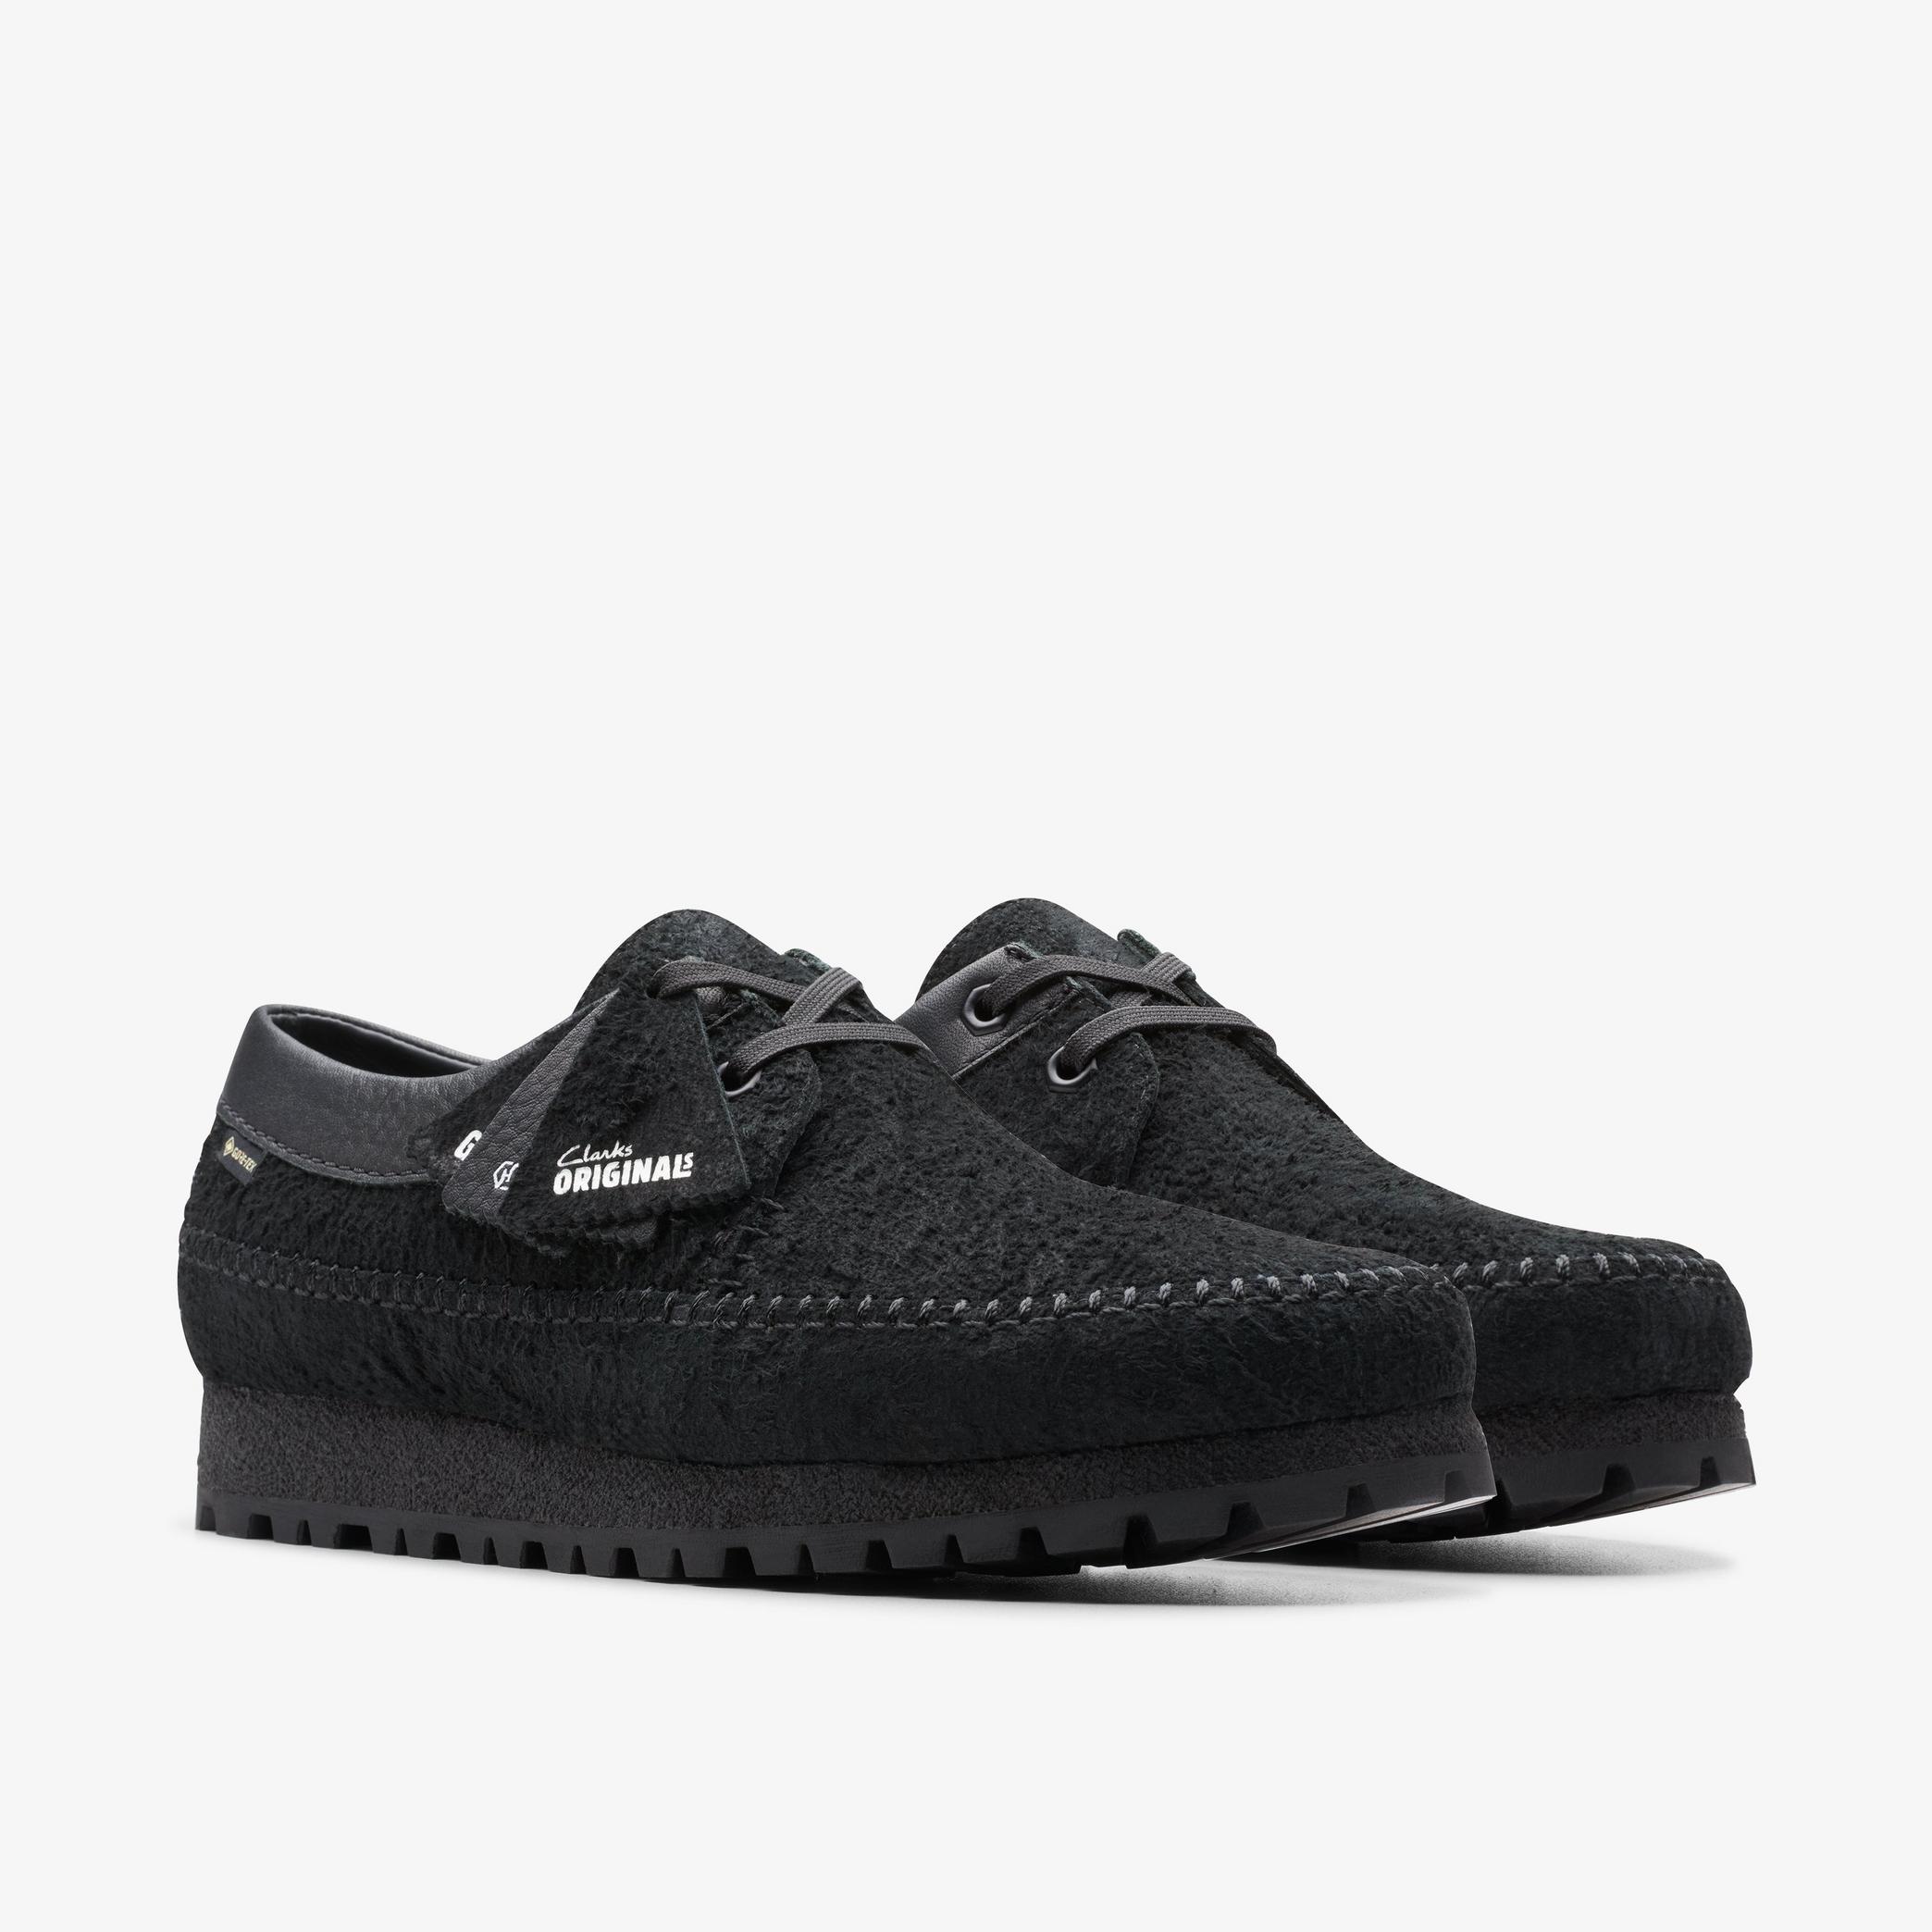 Weaver X Haven GORE-TEX Black Moccasins, view 4 of 6